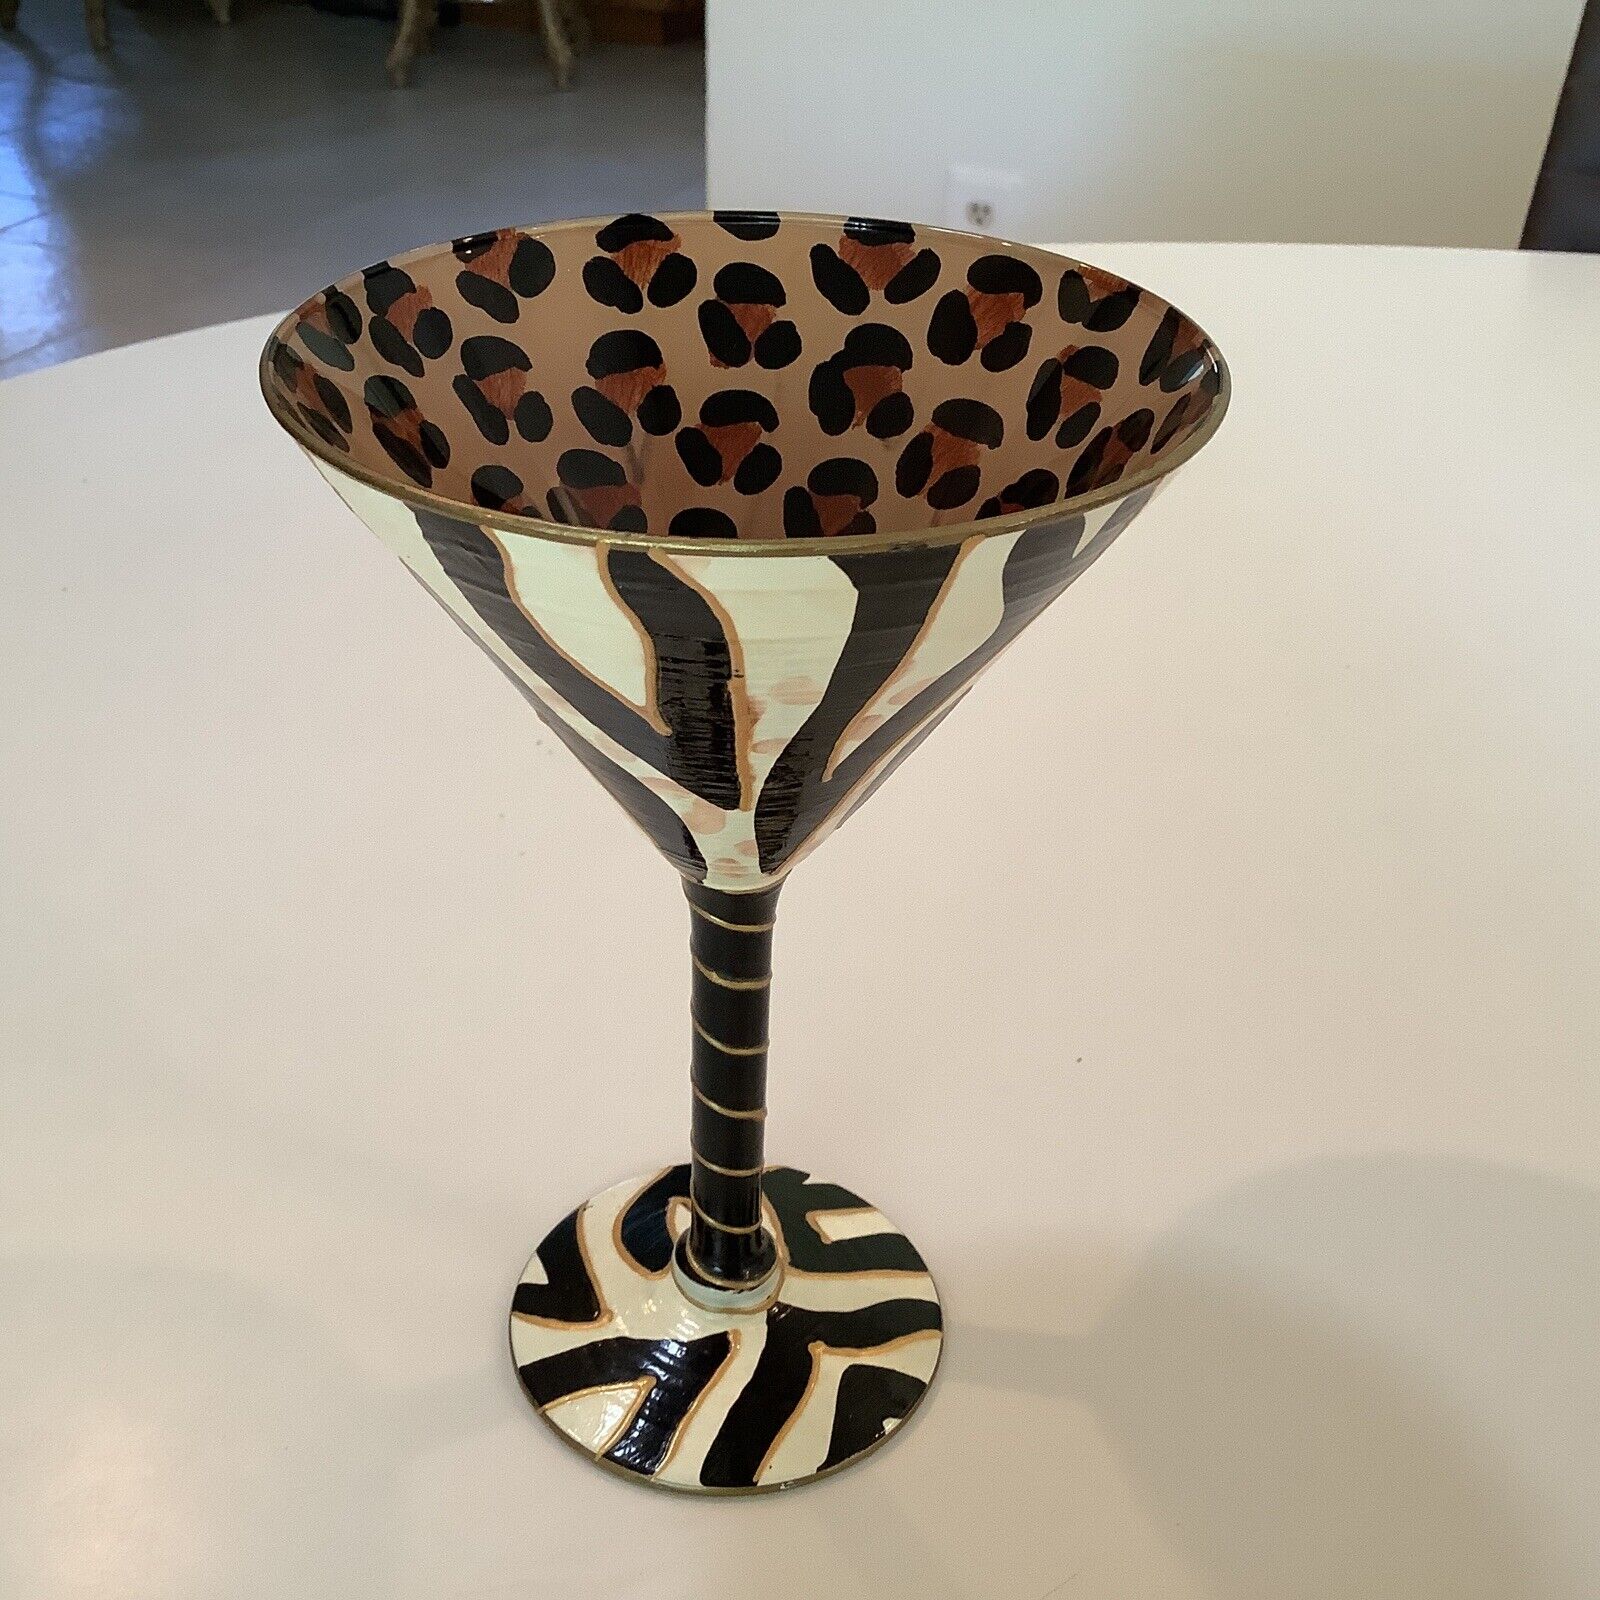 Vintage Cool-Ade Martini Glass Hand painted Signed Leopard Zebra  WOW